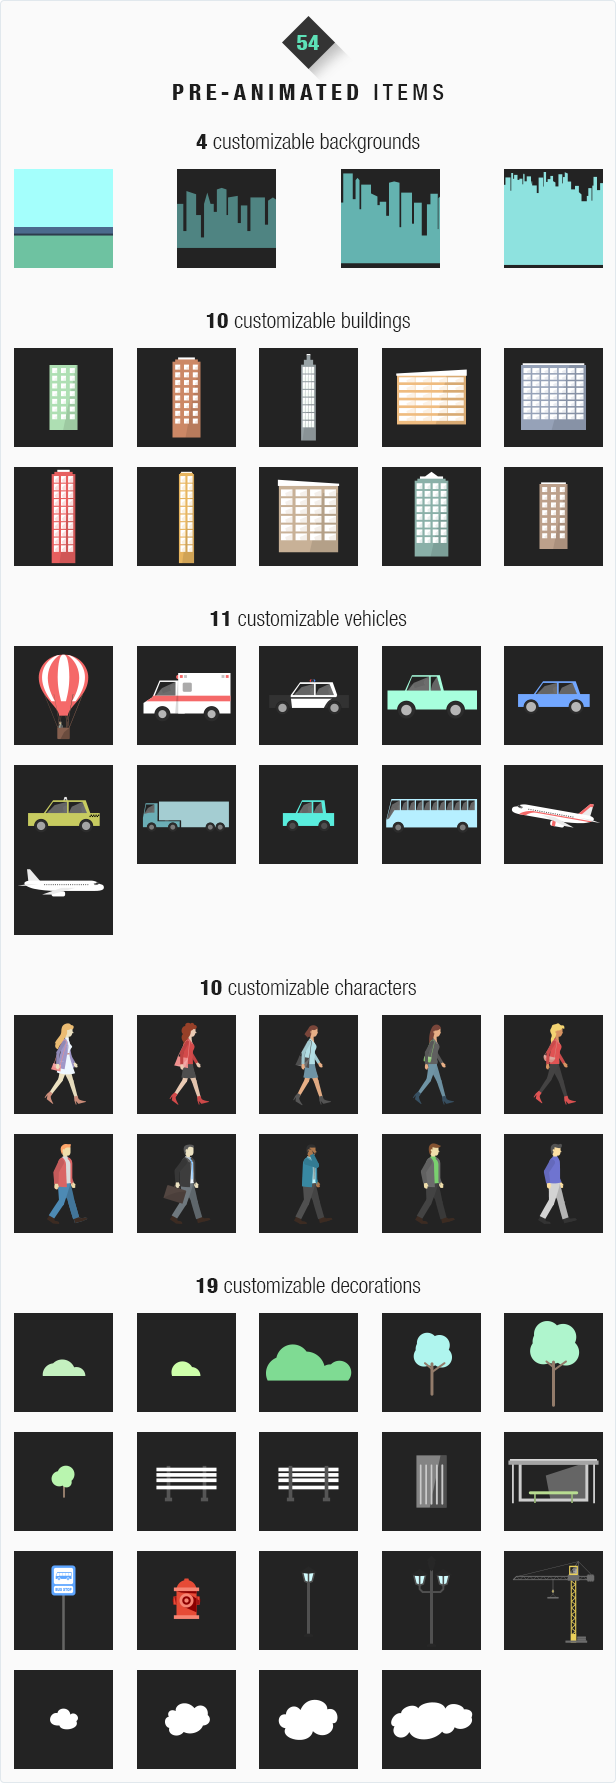 Bundle of 54 preset items - Sky, clouds, airplanes, buildings, characters, vehicles, bus, ambulance, police car, cars, decorations, crane, trees, bushes, benches, bus stop